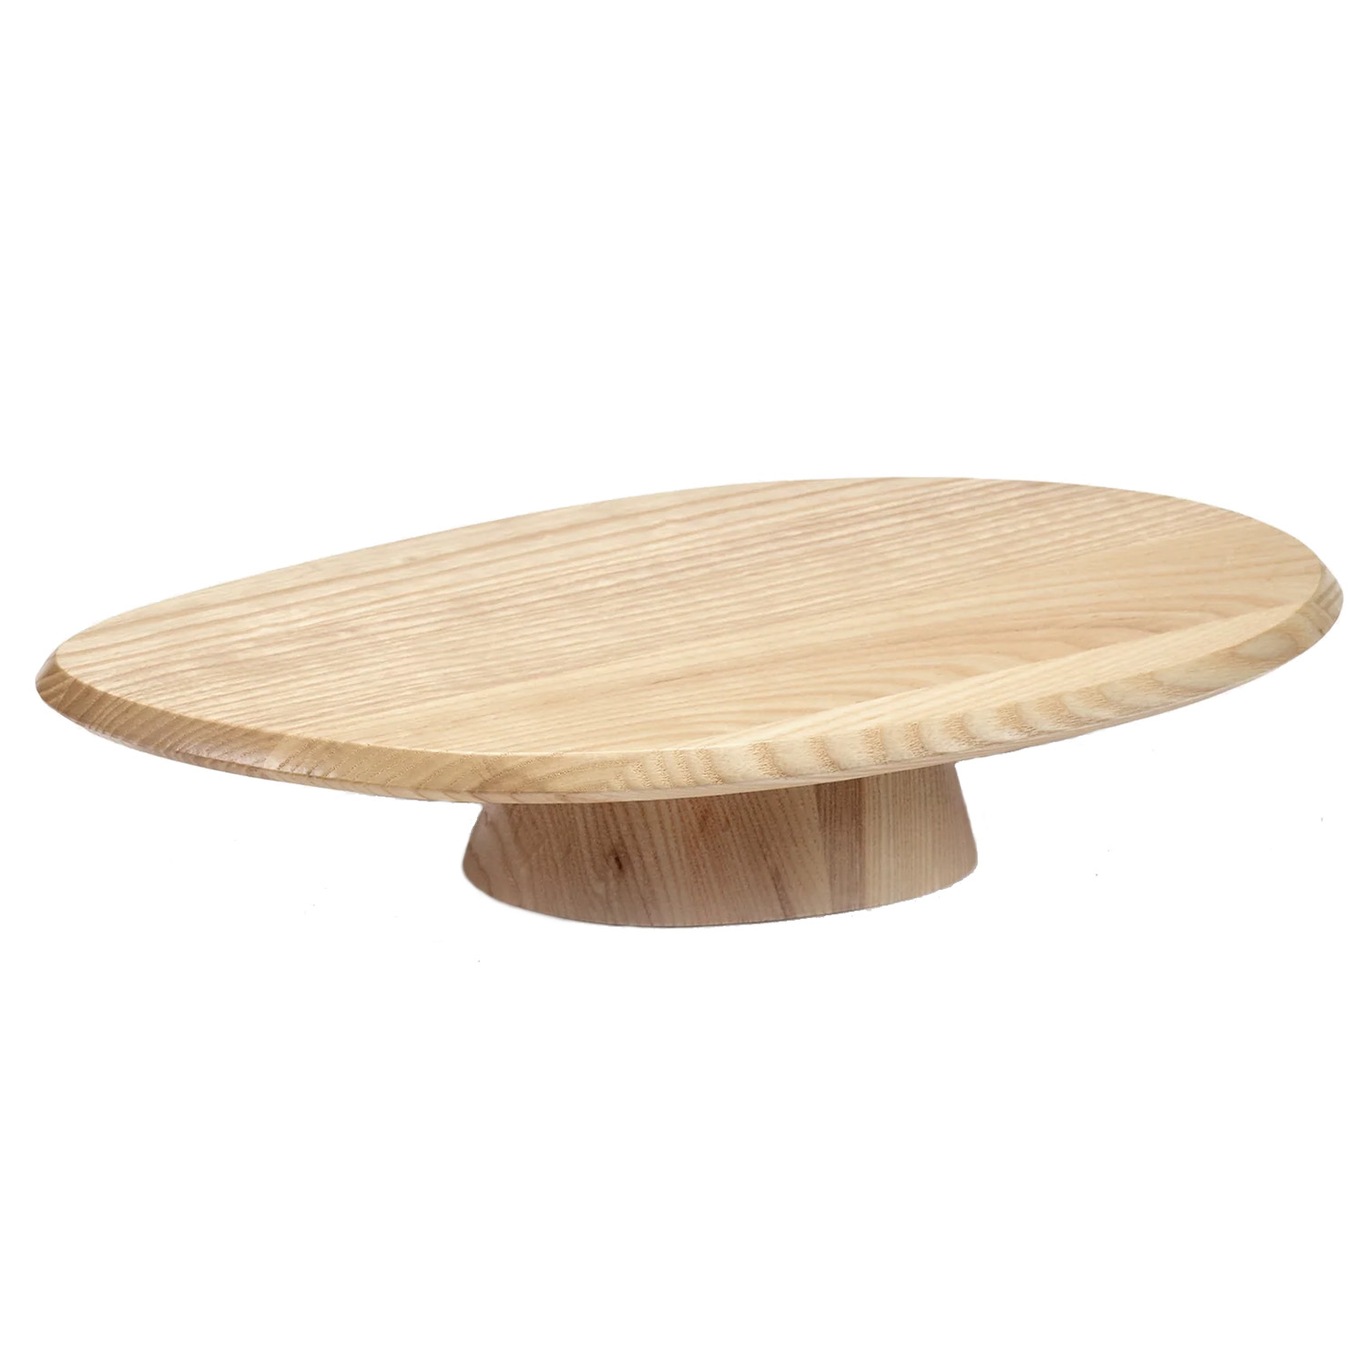 04 Low Dune Cake Stand, Natural